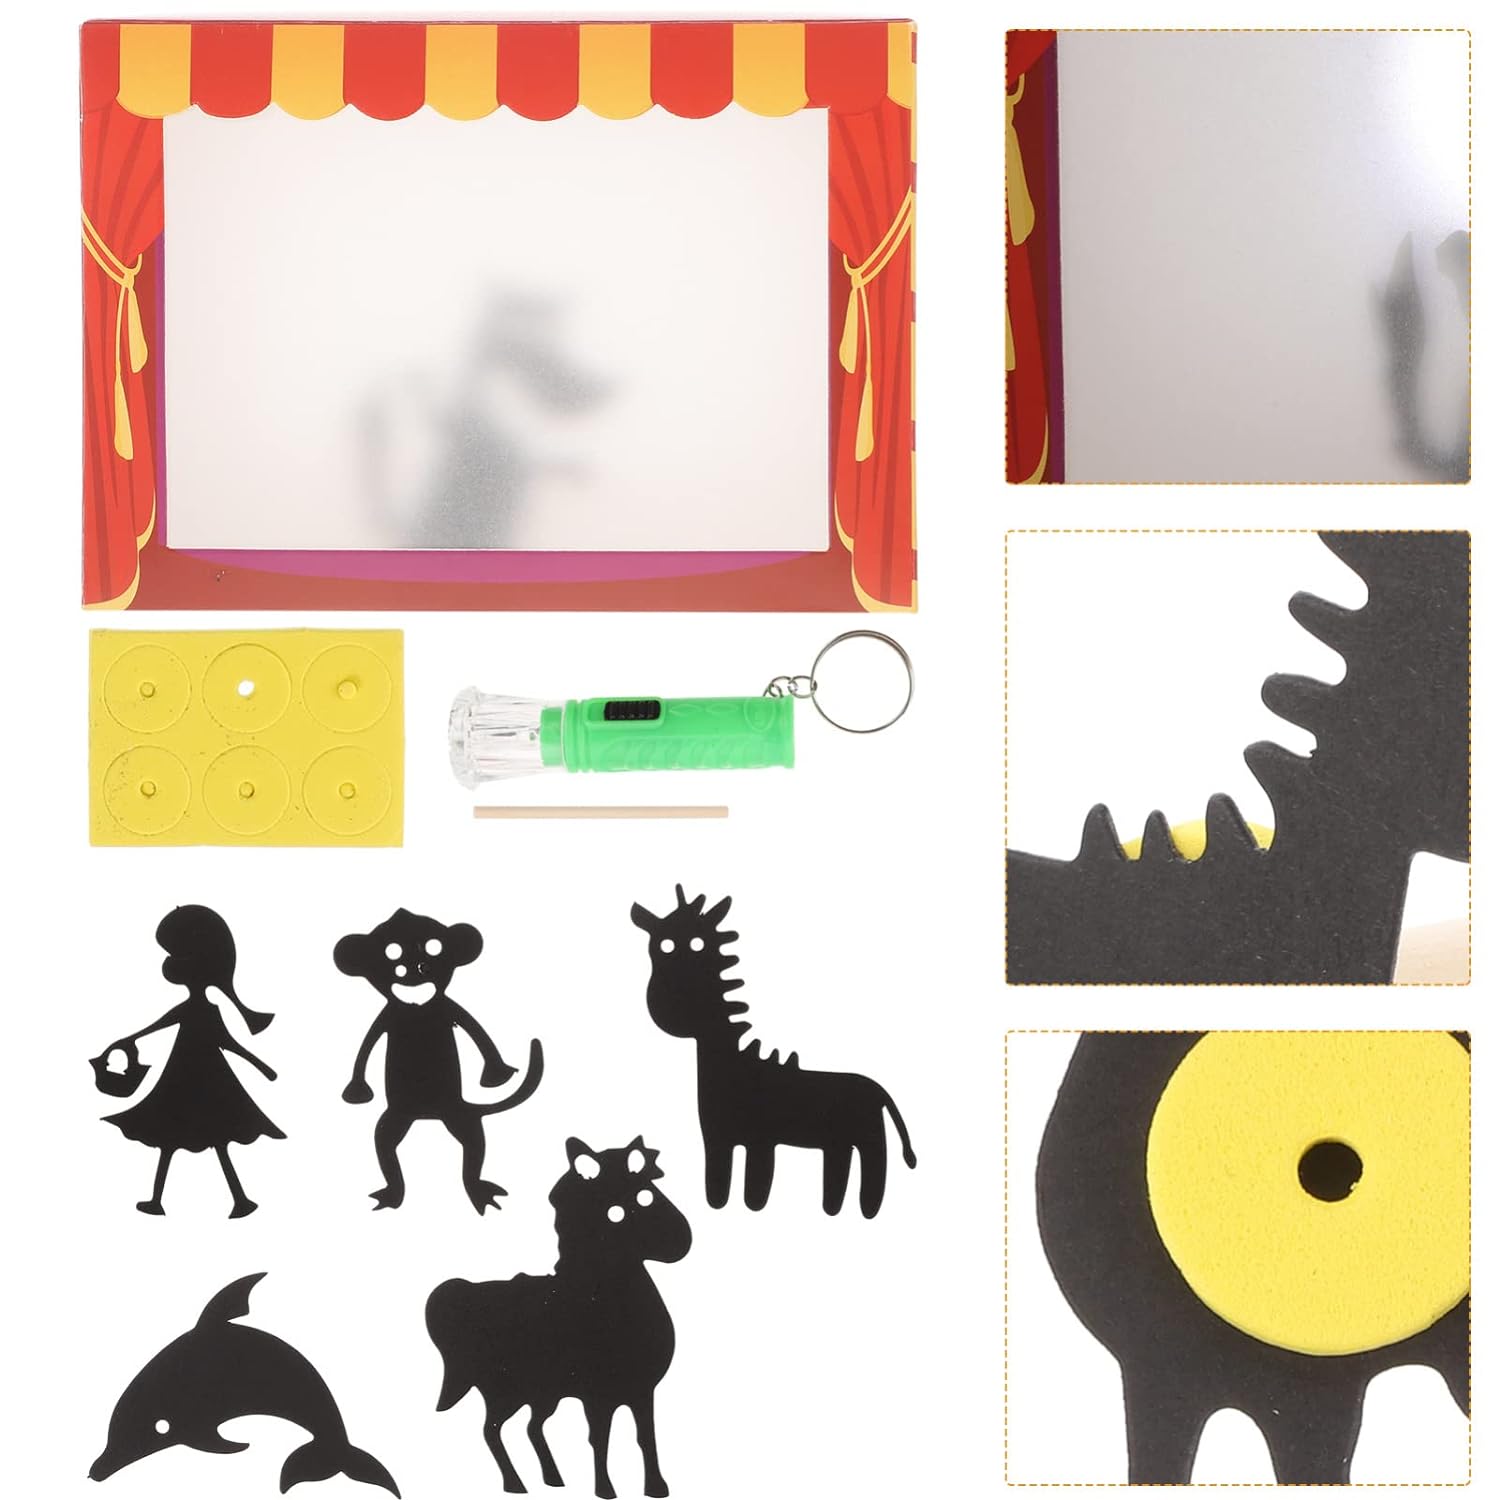 Great Choice Products Puppet Show Theater Hand Shadow Puppets Kids Diy Shadow Puppets Toys Educational Handmade Shadow Puppet Show 1 Set